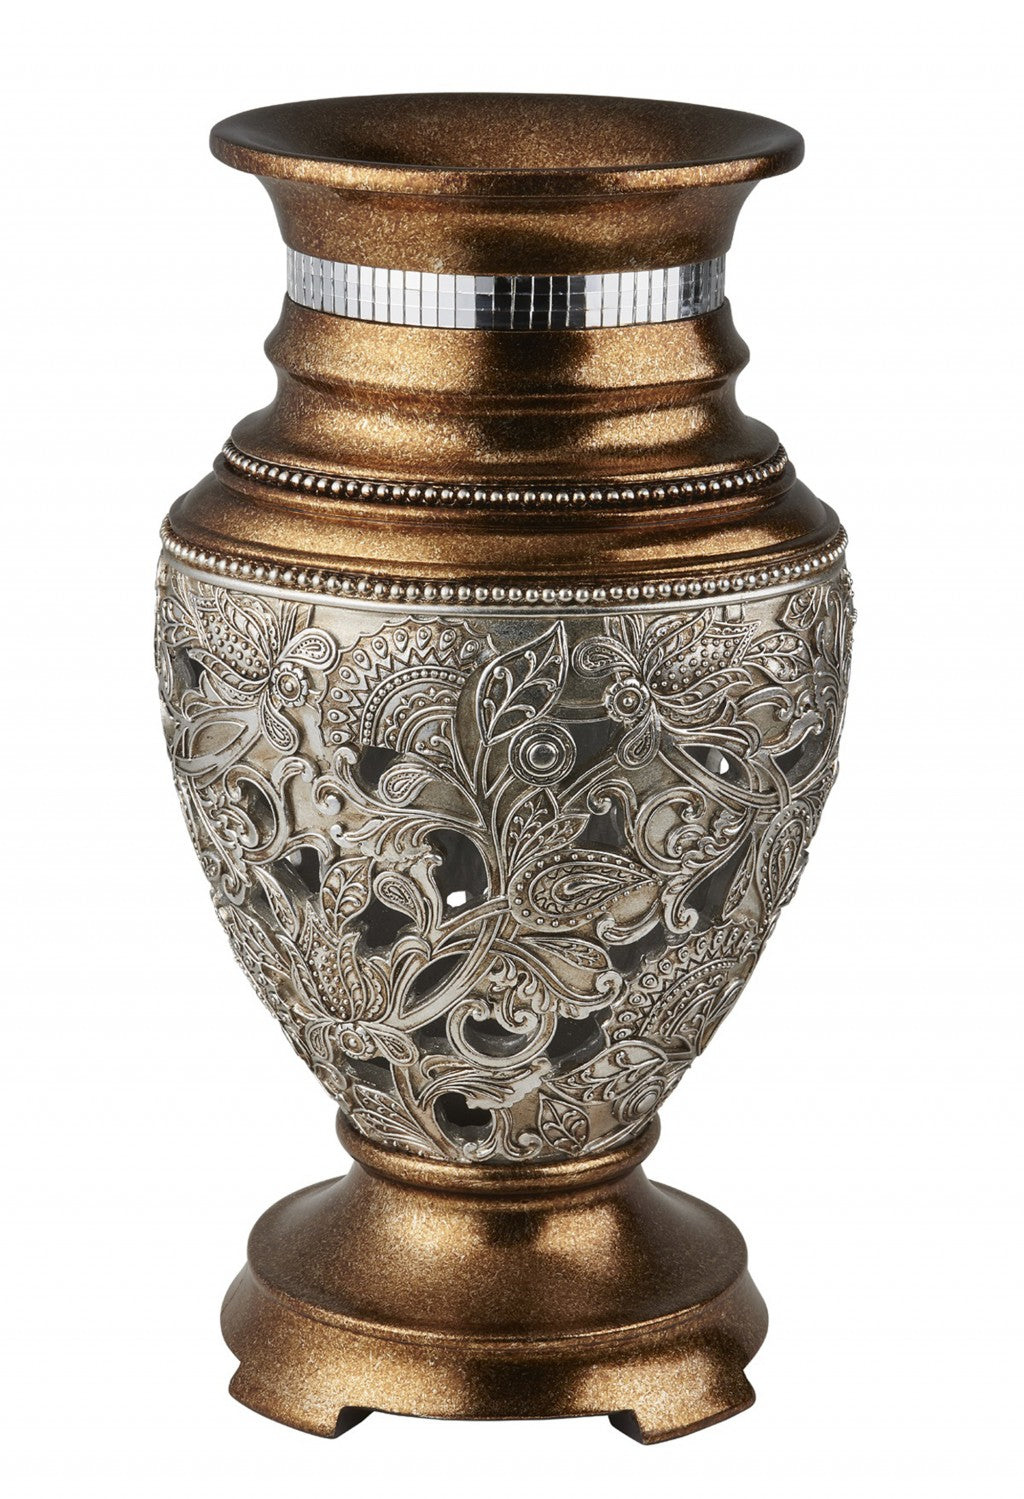 15" Gold and Silver Paisley Polyresin Round Urn Vase